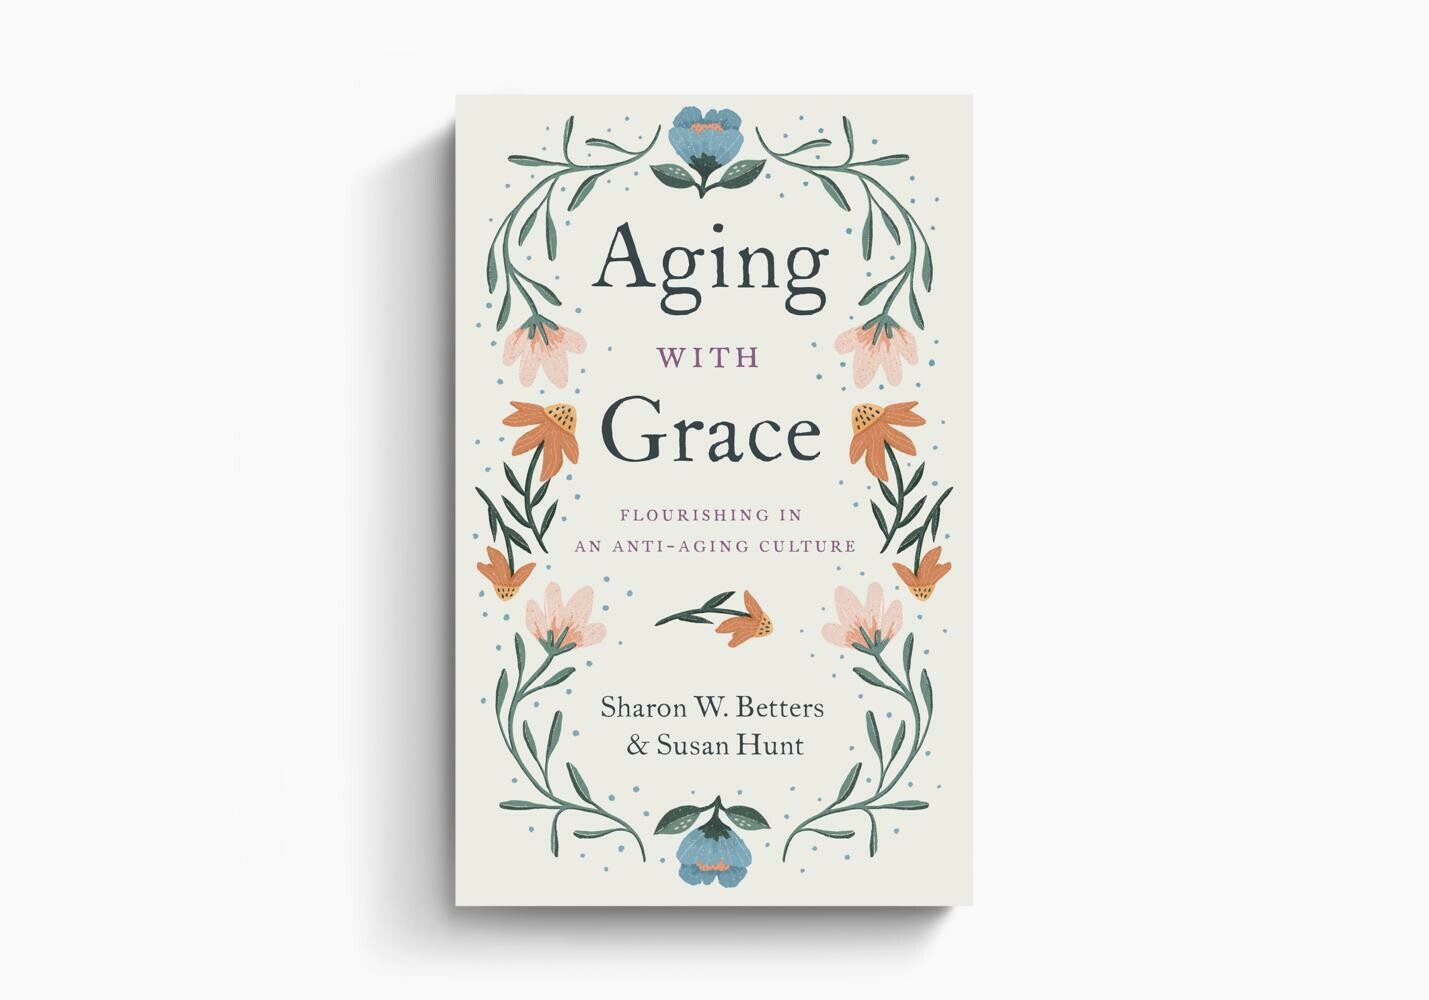 Aging With Grace: Flourishing In An Anti-Aging Culture by Sharon Waters